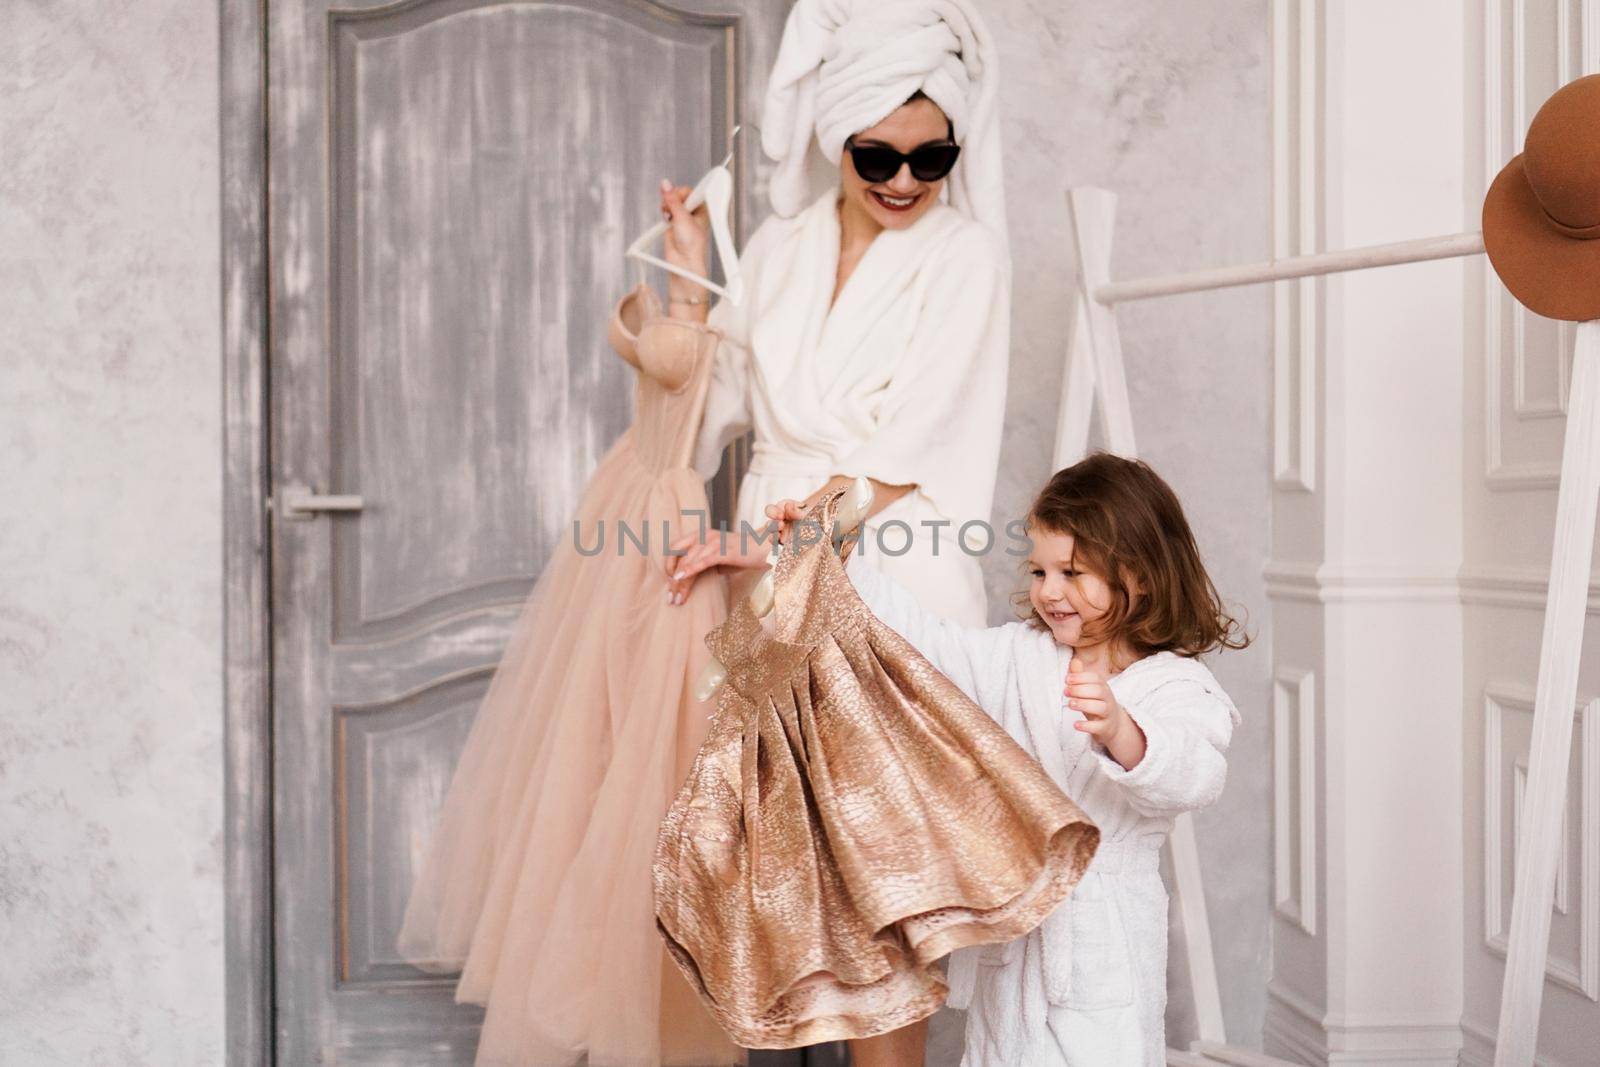 Happy mother and daughter are choosing a dress in the wardrobe. The mother is wearing a white bathrobe. They are going to the party.